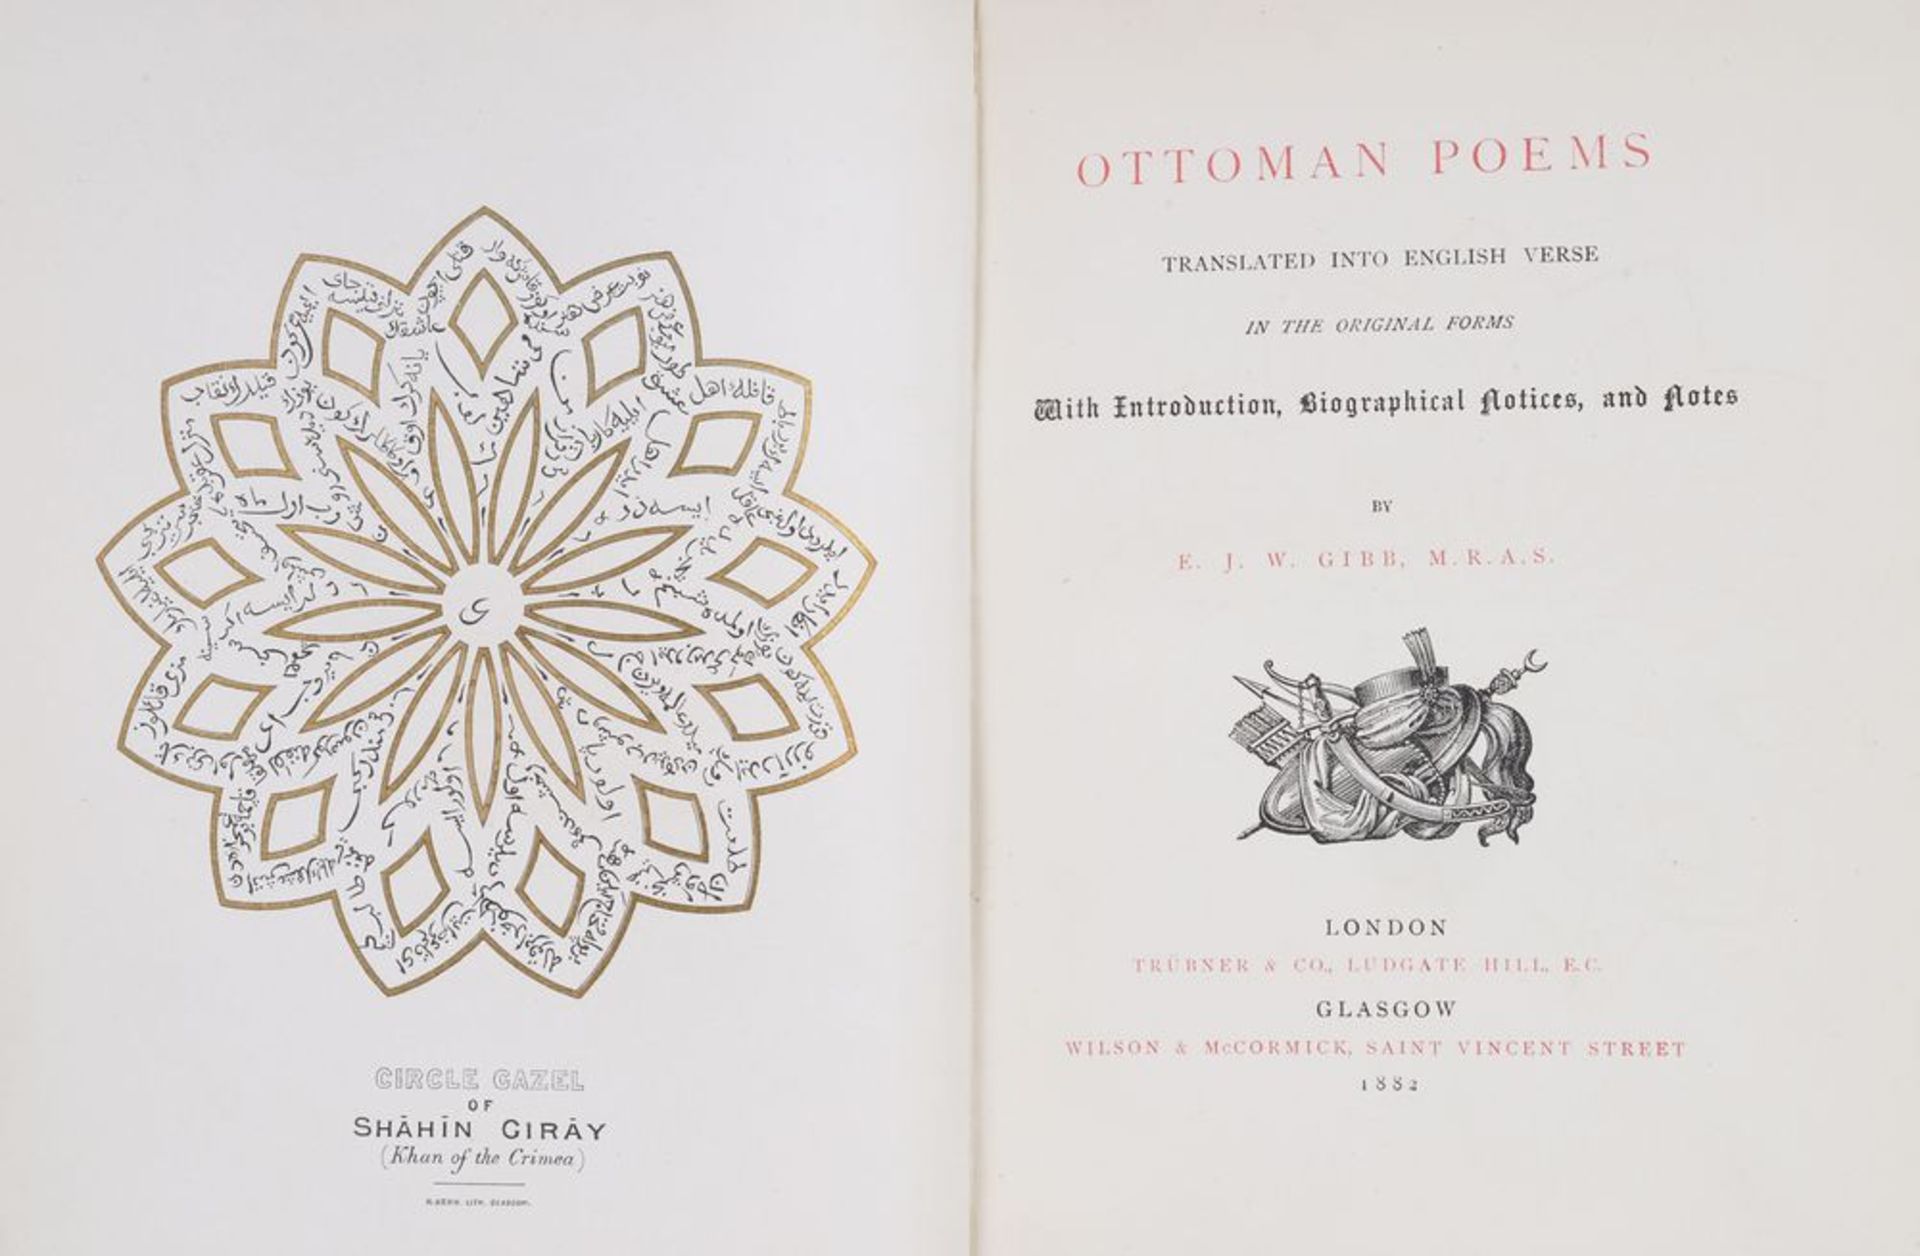 OTTOMAN POEMS - Ottoman poems, translated into English verse in the original forms, [...] - Image 2 of 4